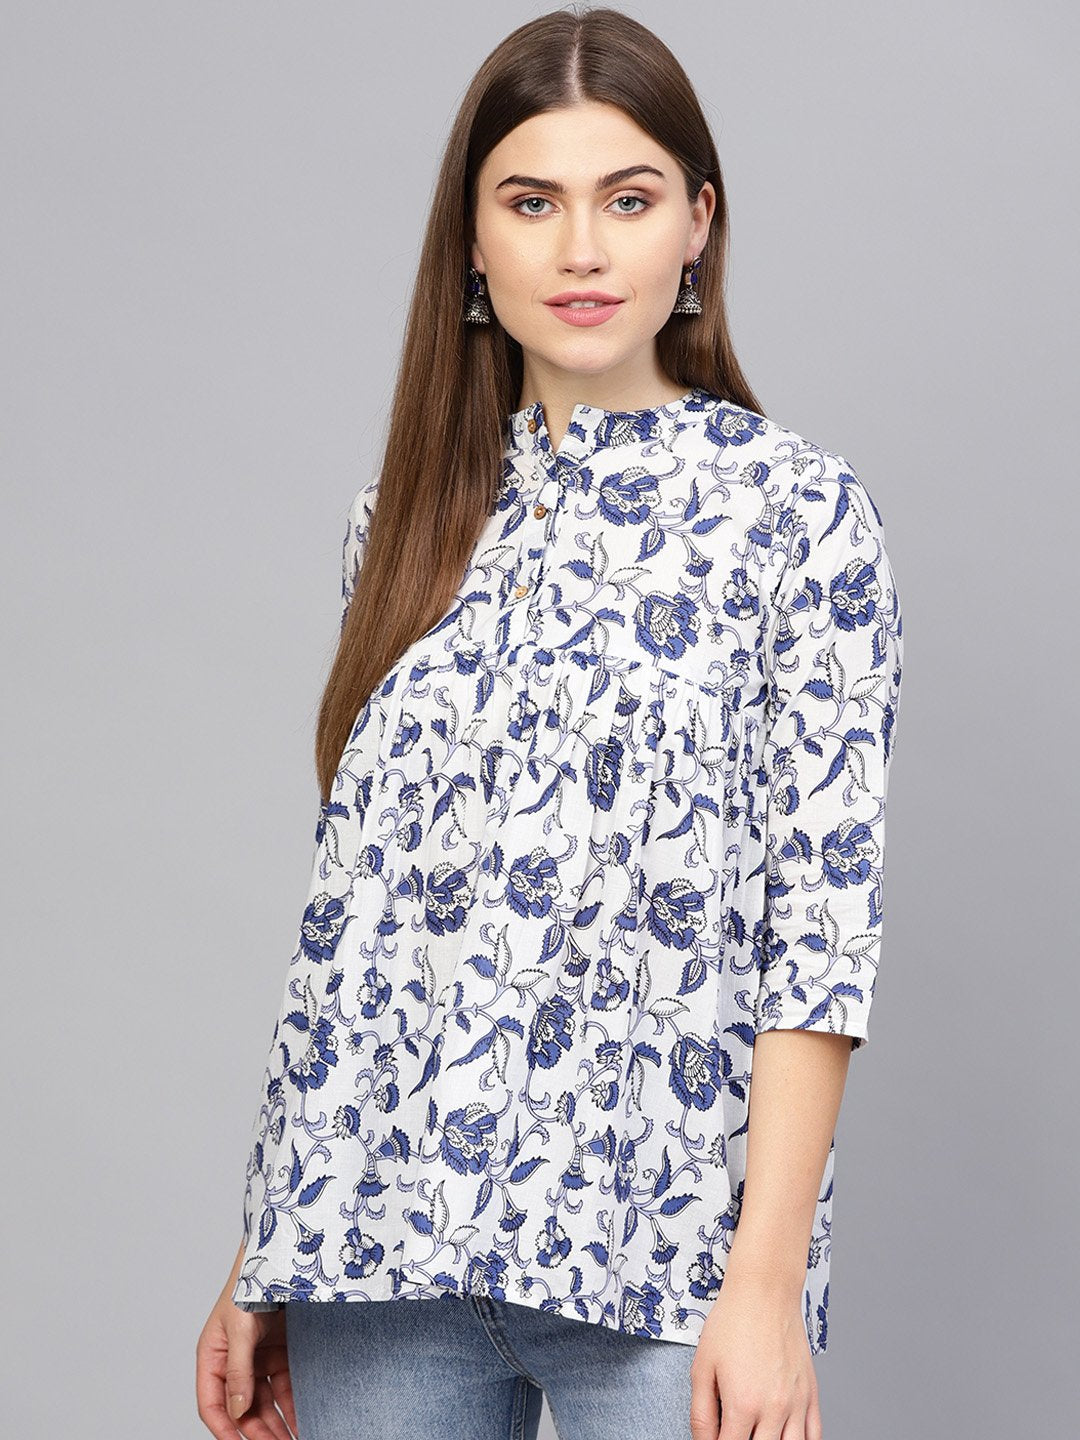 Women's Off-White & Blue Printed A-Line Tunic - Nayo Clothing